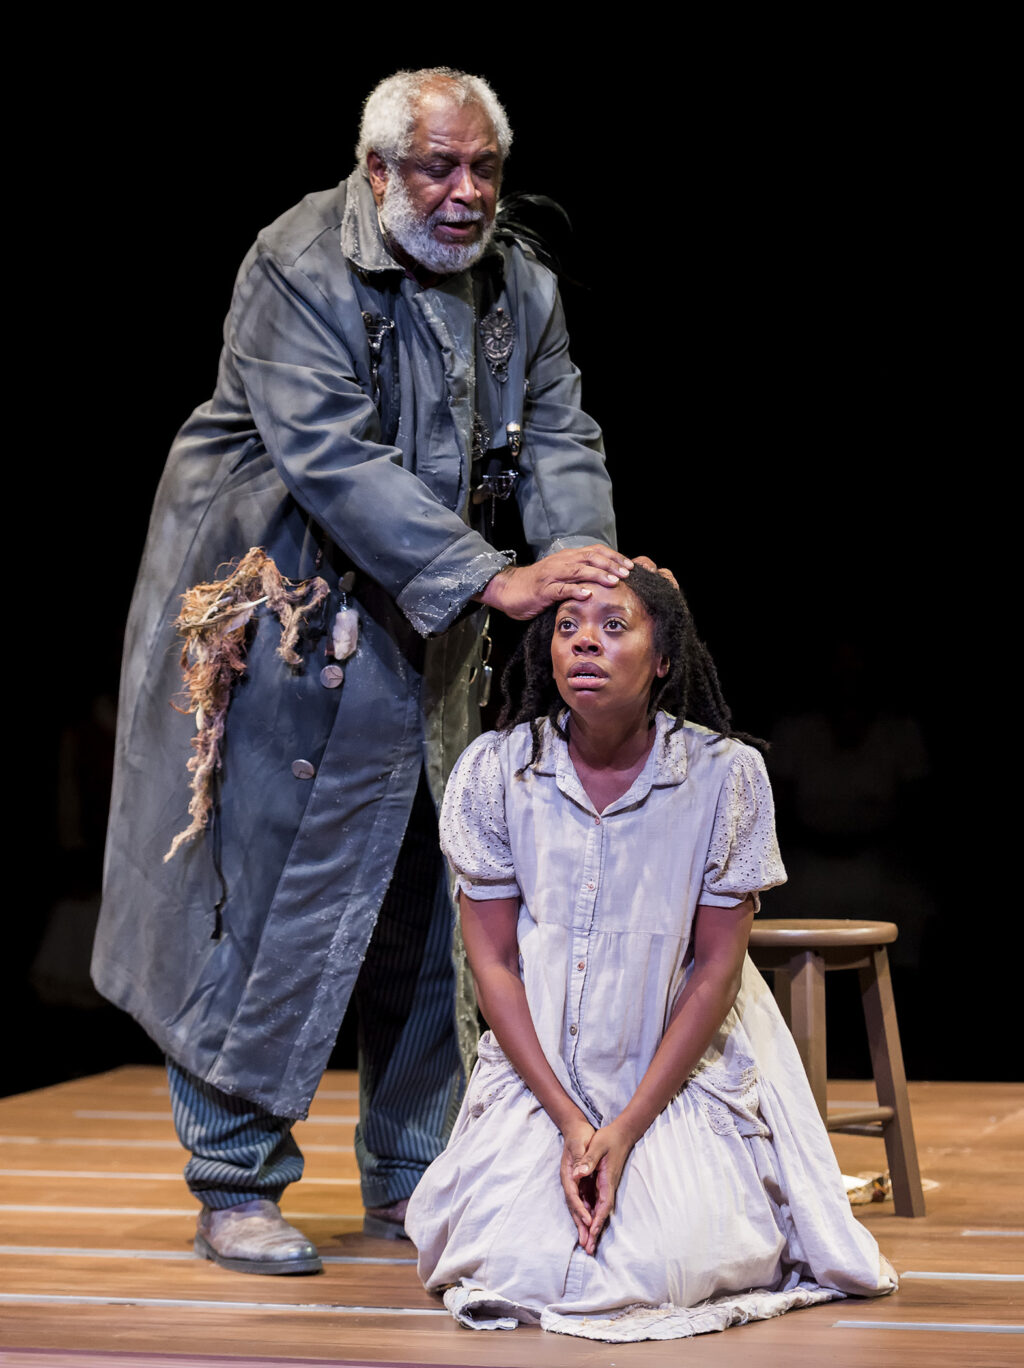 A NoHo Arts theatre review of “The Bluest Eye” by Pulitzer and Nobel Prize-winning author Toni Morrison, adapted for the stage by Lydia R. Diamond and directed by Andi Chapman at A Noise Within